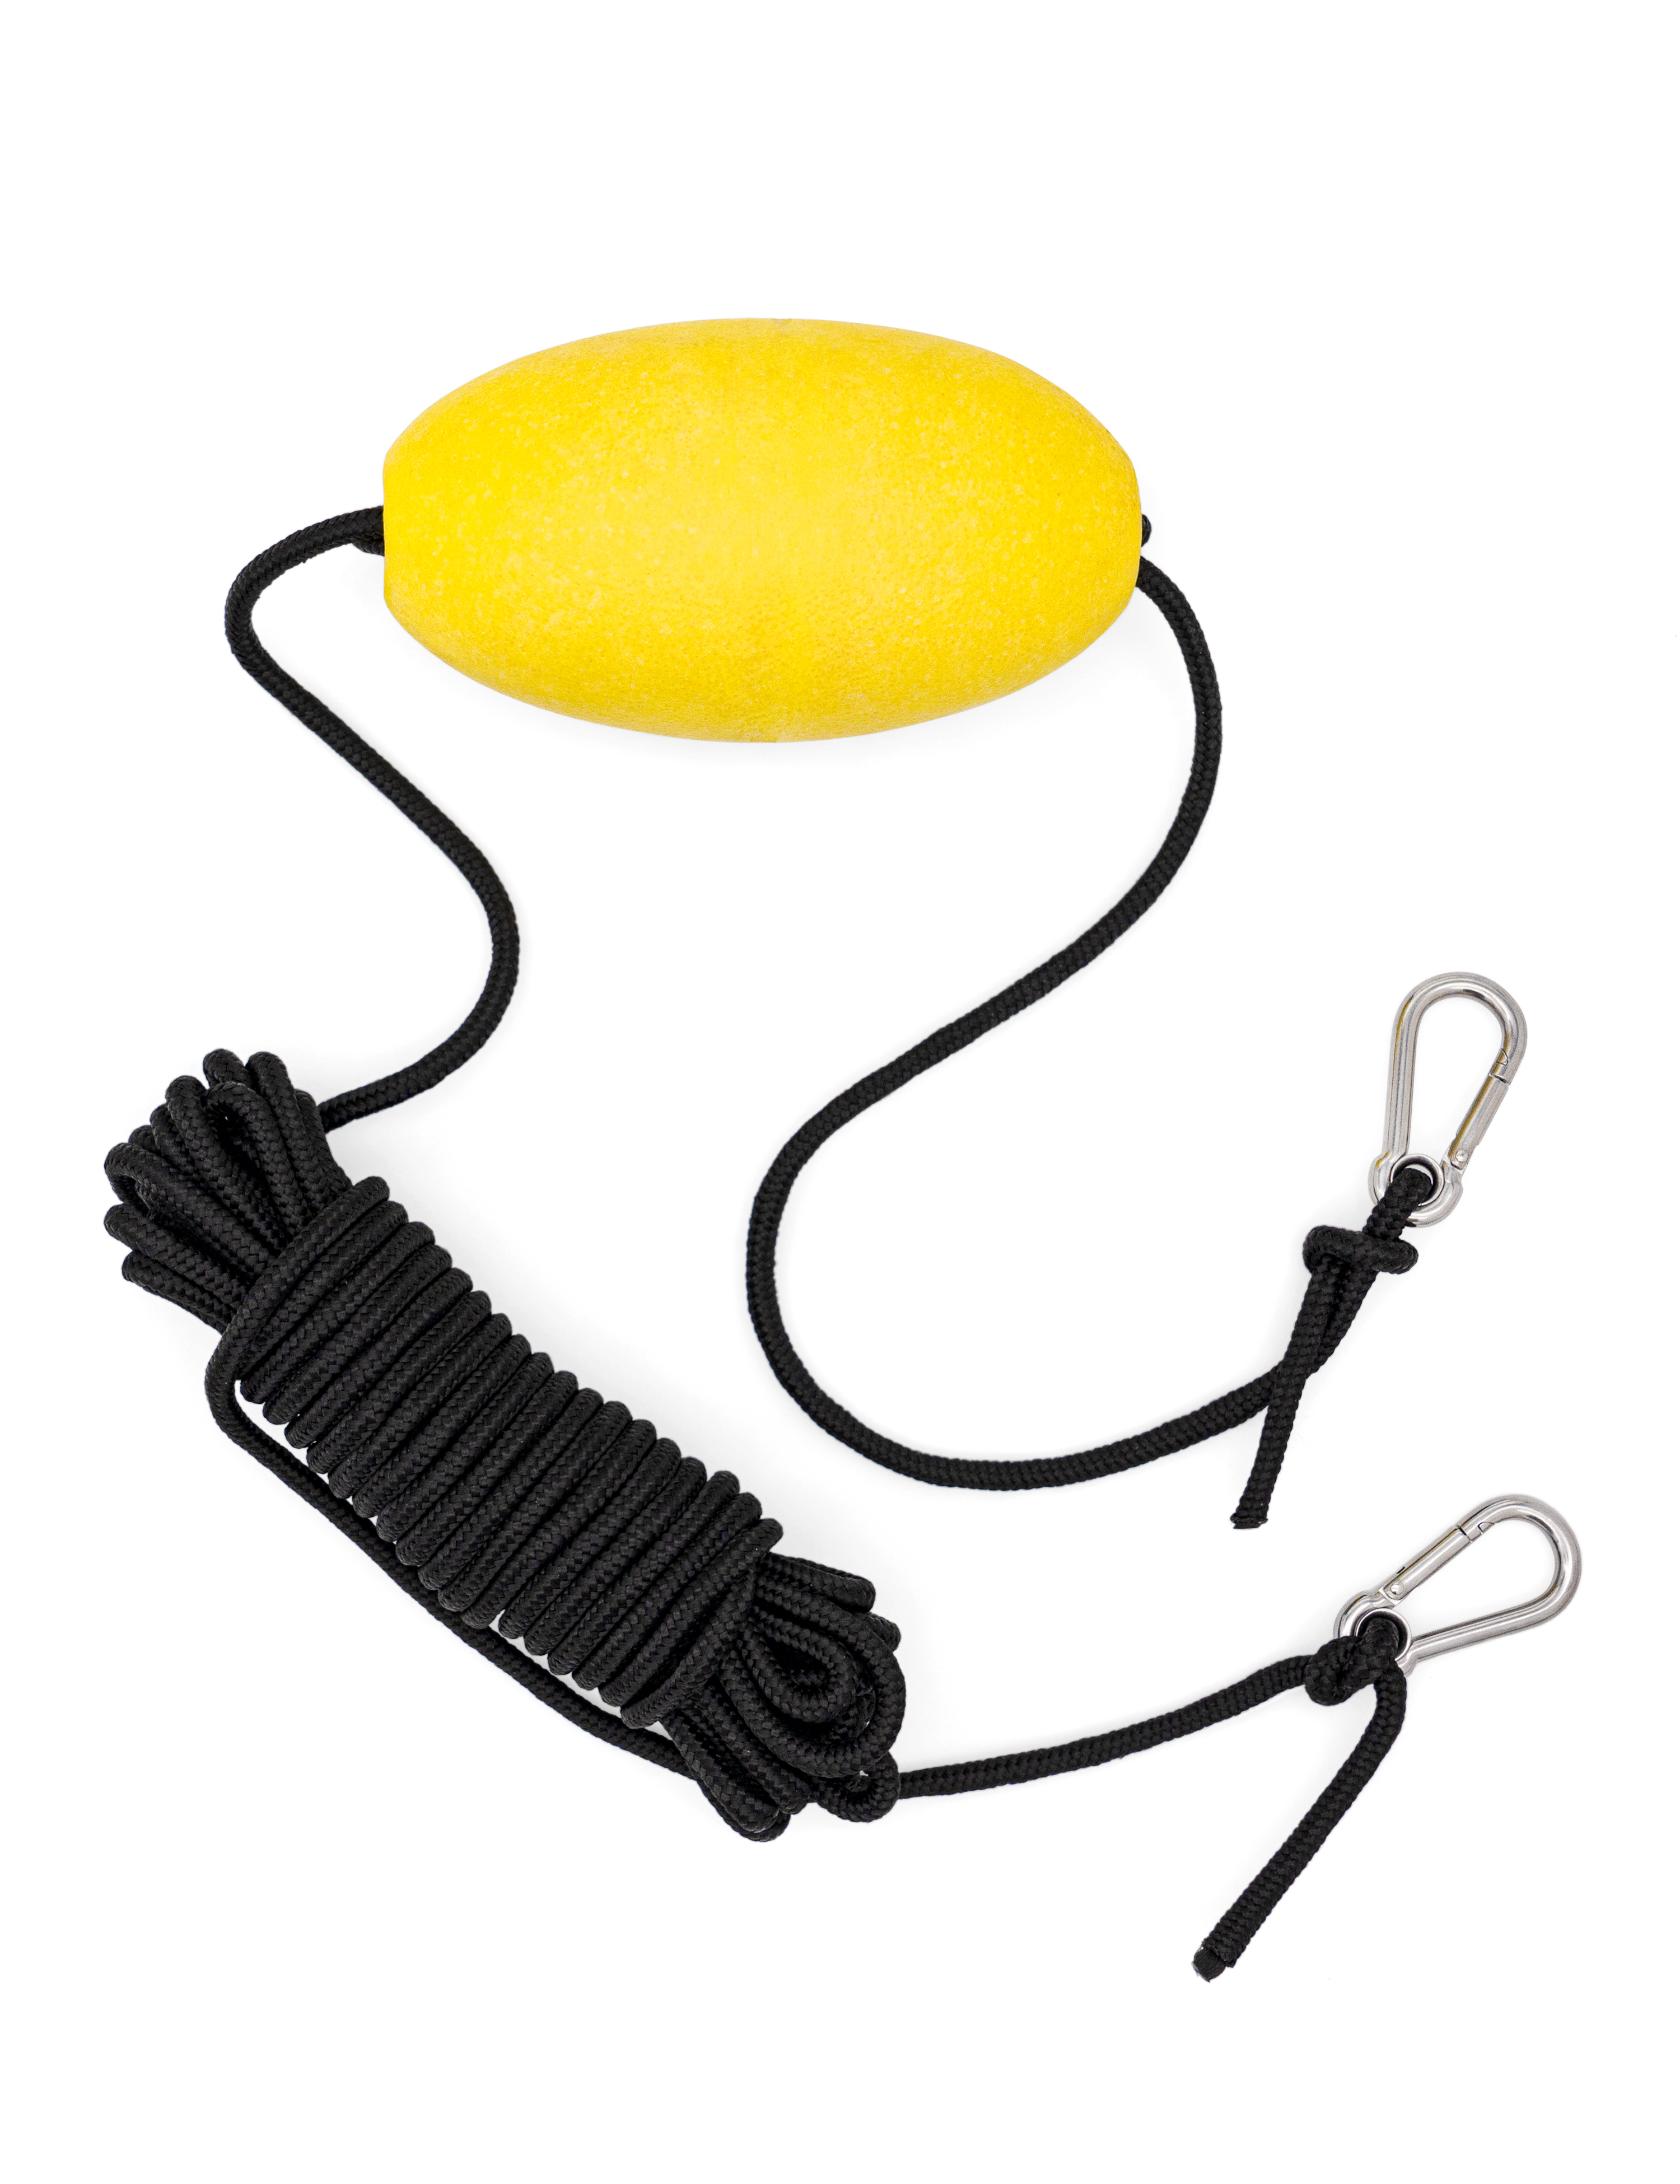 BLUEWING Buoy Ball Float with Stainless Steel Clips and Leash